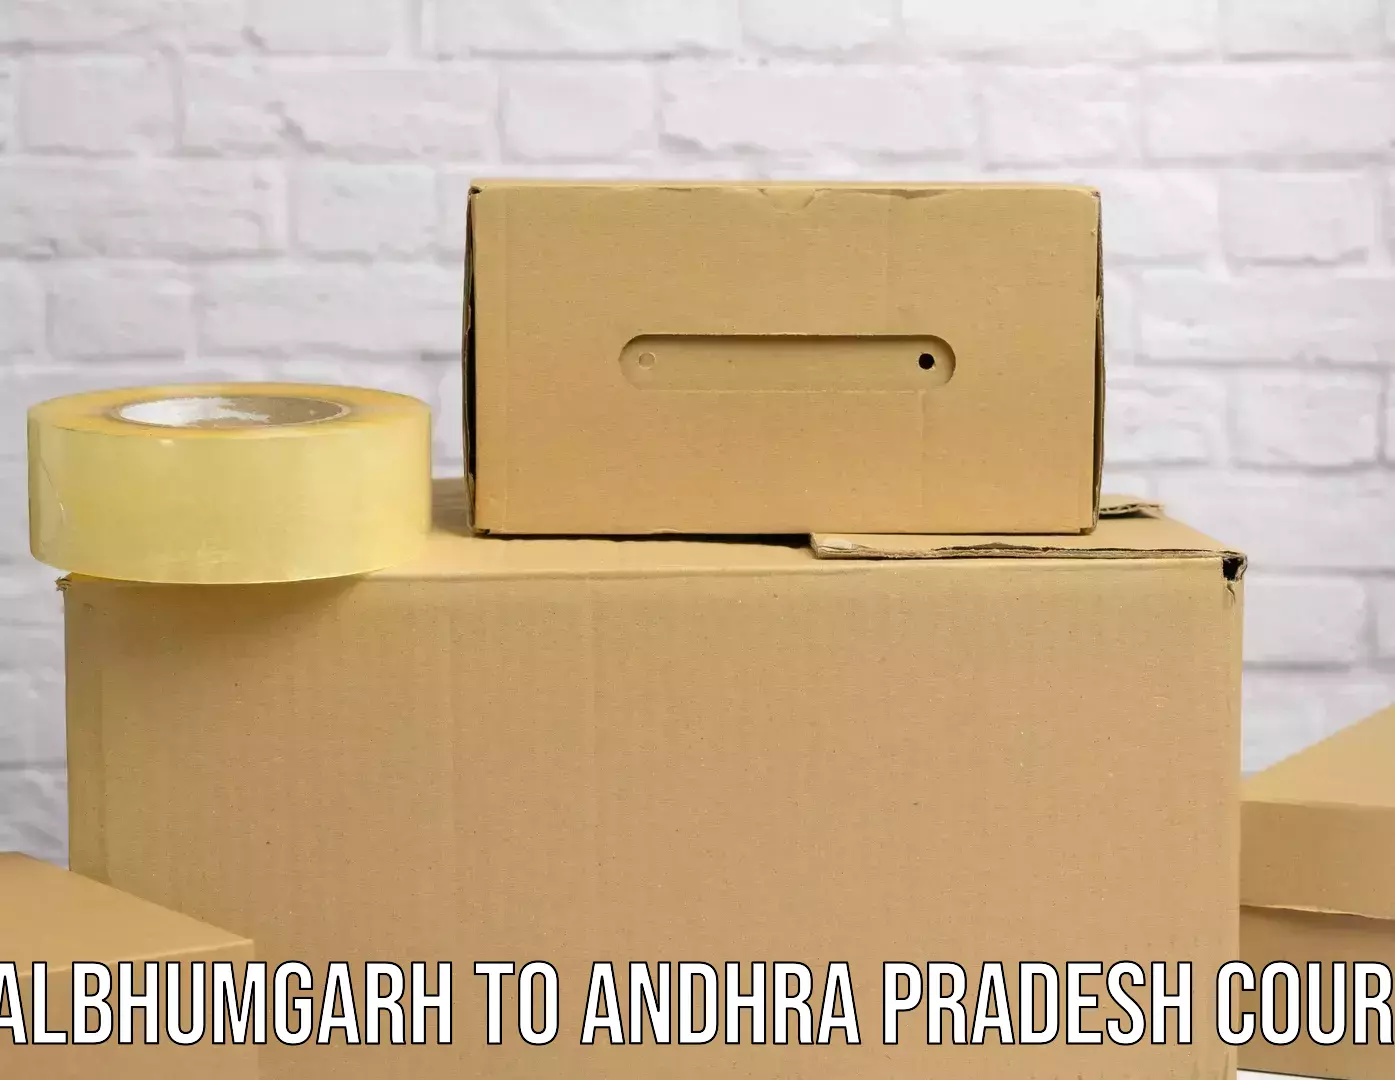 Express package delivery in Dhalbhumgarh to Andhra Pradesh